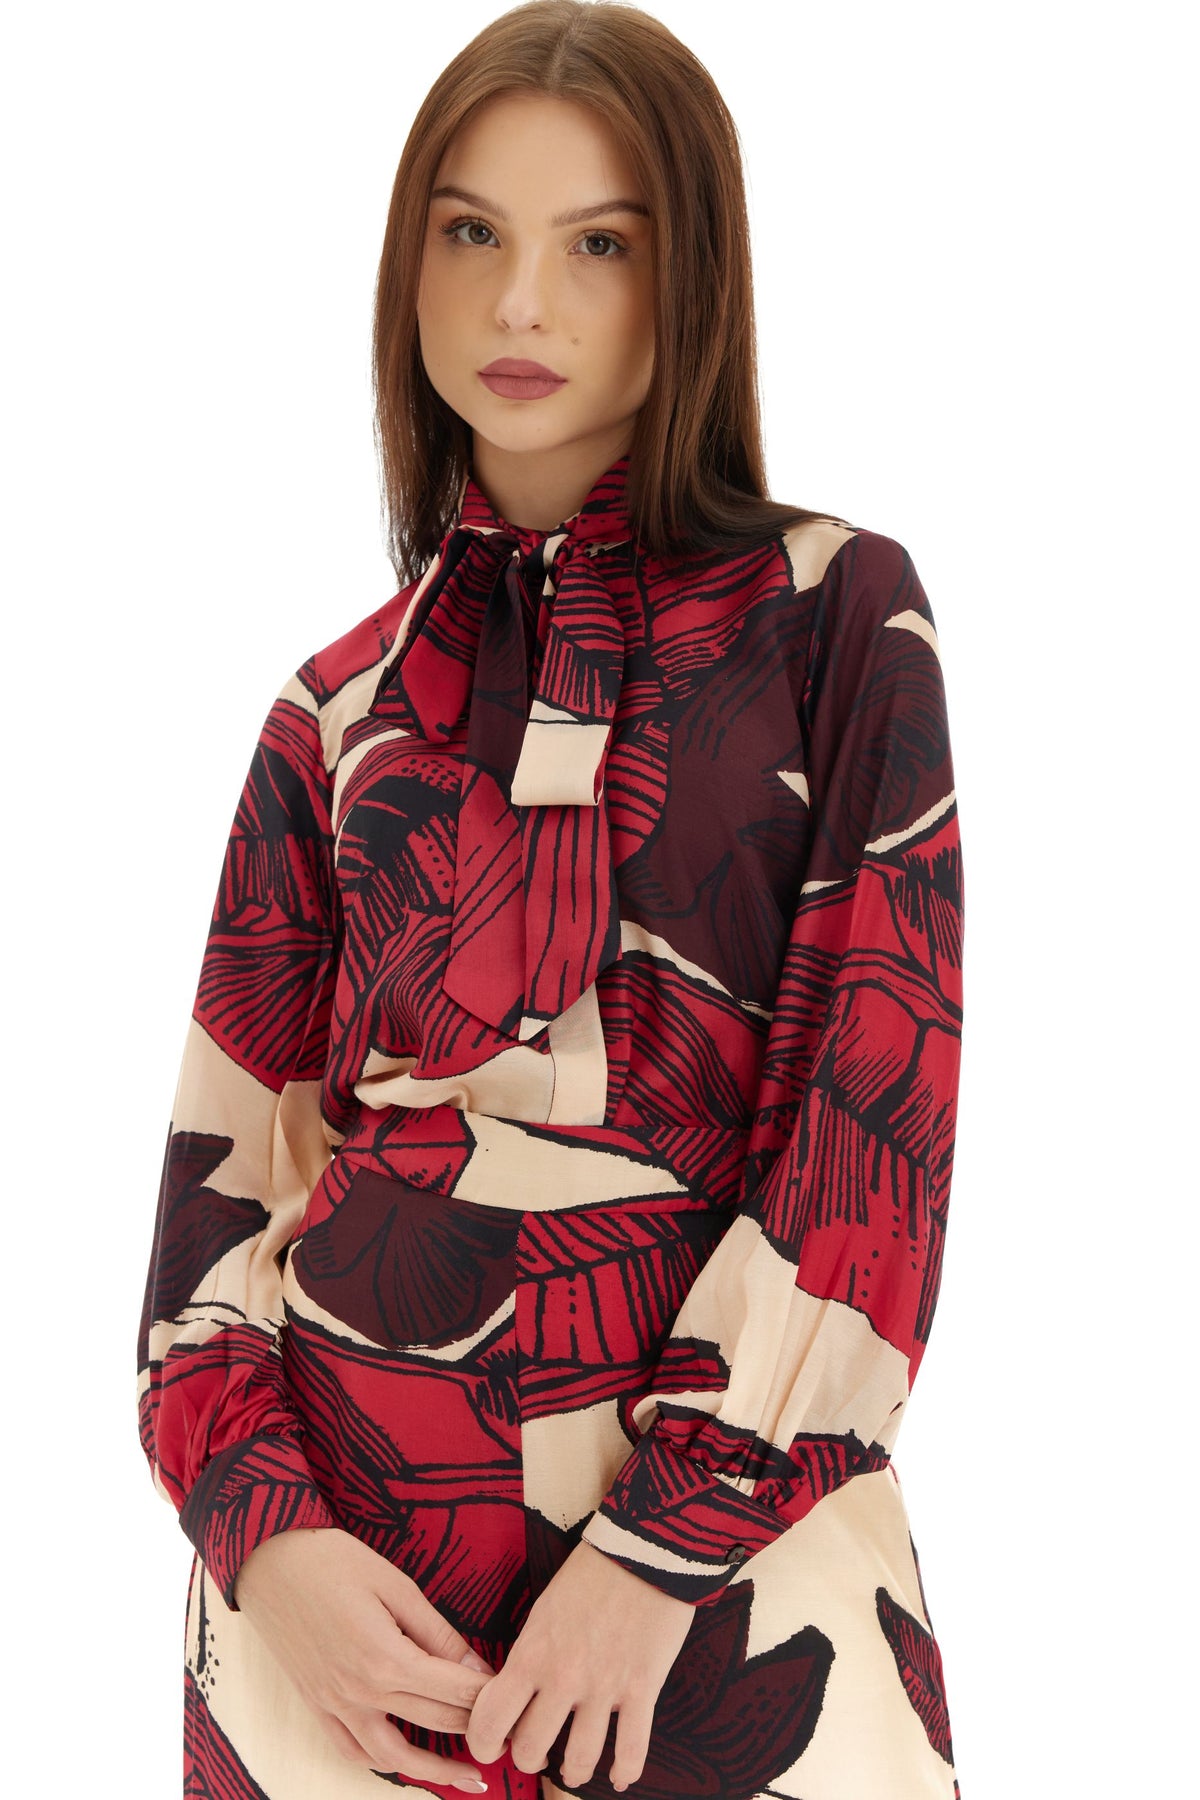 OFF WHITE, RED & BROWN FLORAL BOW SHIRT